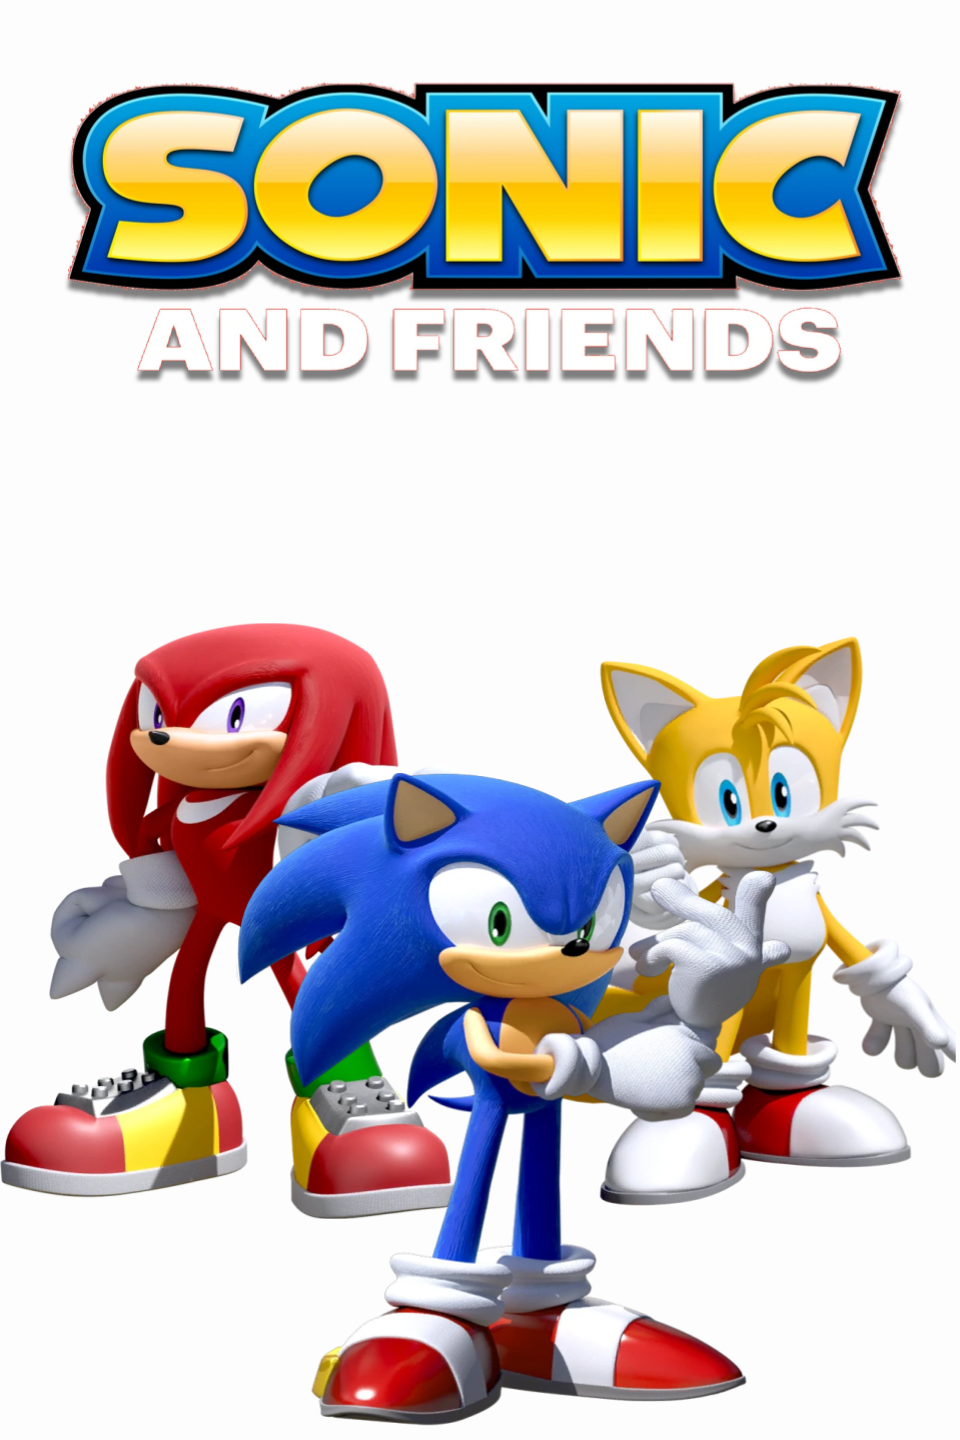 Sonic and friends (Sonic 1 style) : r/SonicTheHedgehog